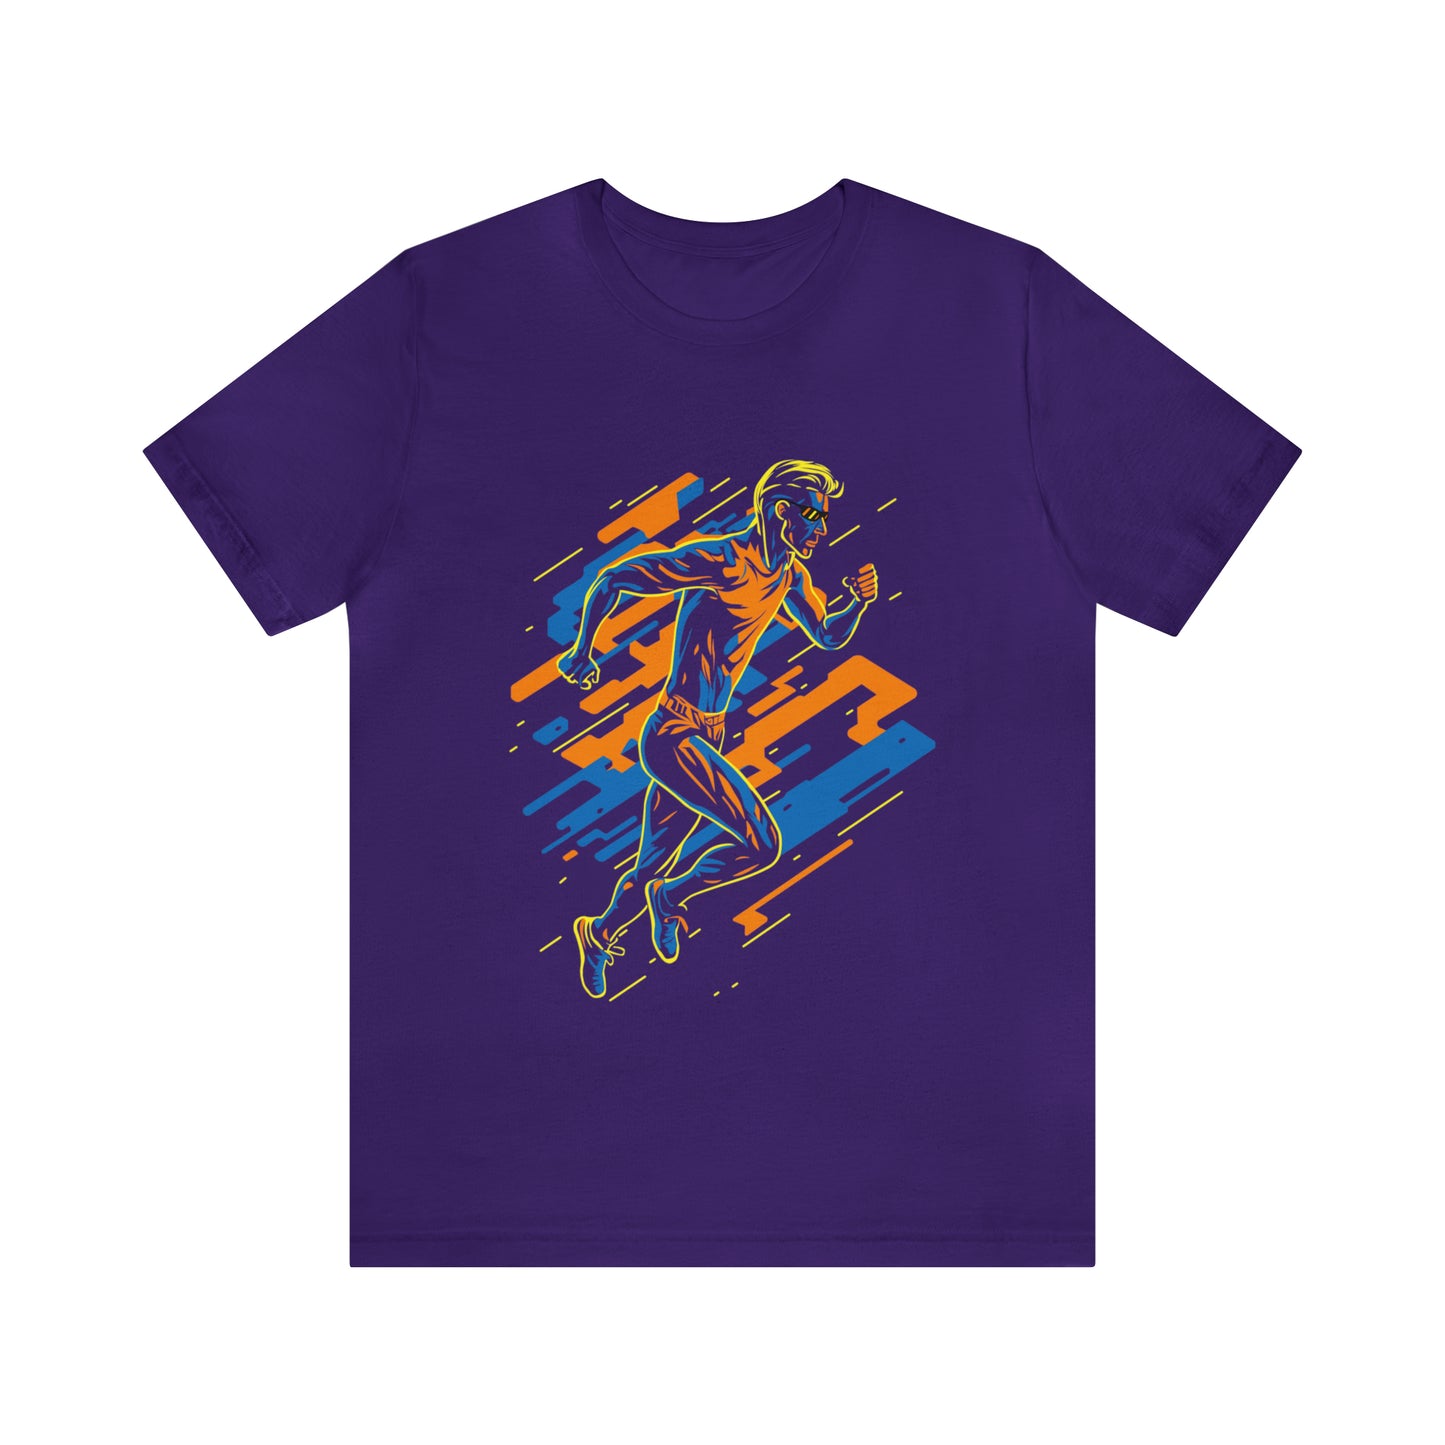 Purple T-Shirt featuring a vibrant and dynamic runner design, capturing the energy of a 'Running Man'. Taken from the TEQNEON Radioactive collection